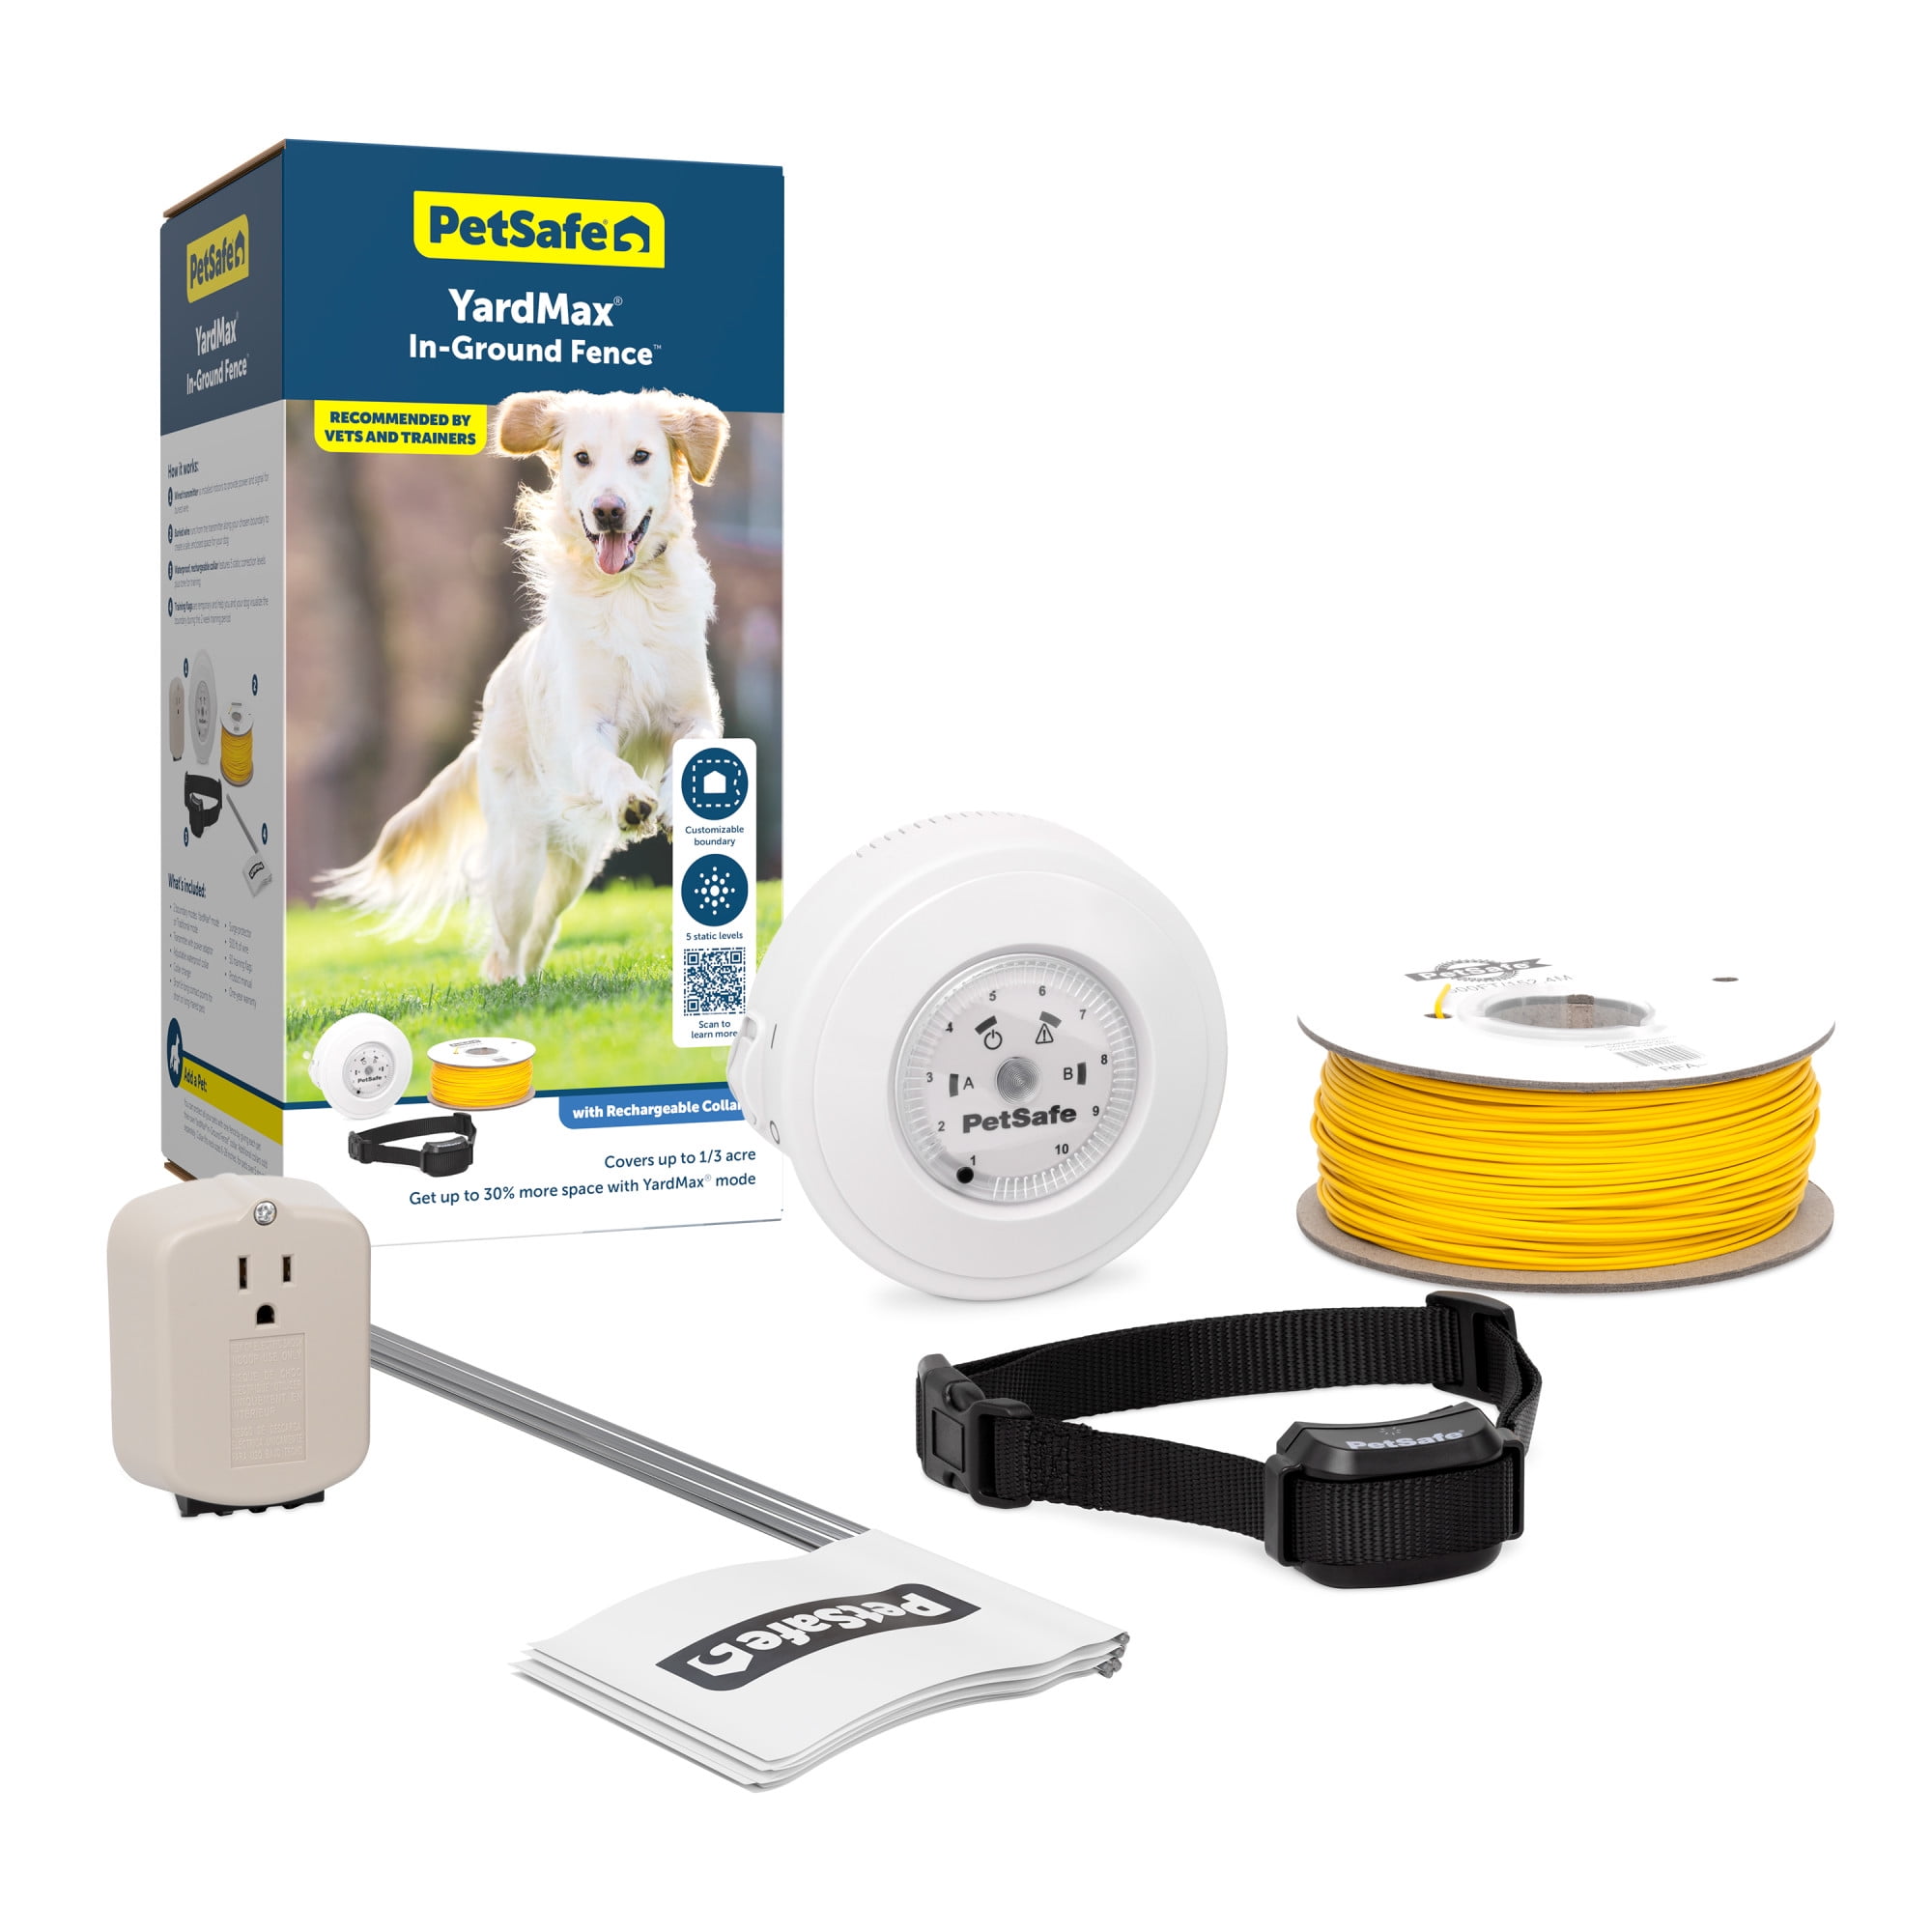 Wireless Dog Fence Electric Fence Coverage Up to 1.2 Acre,Pet